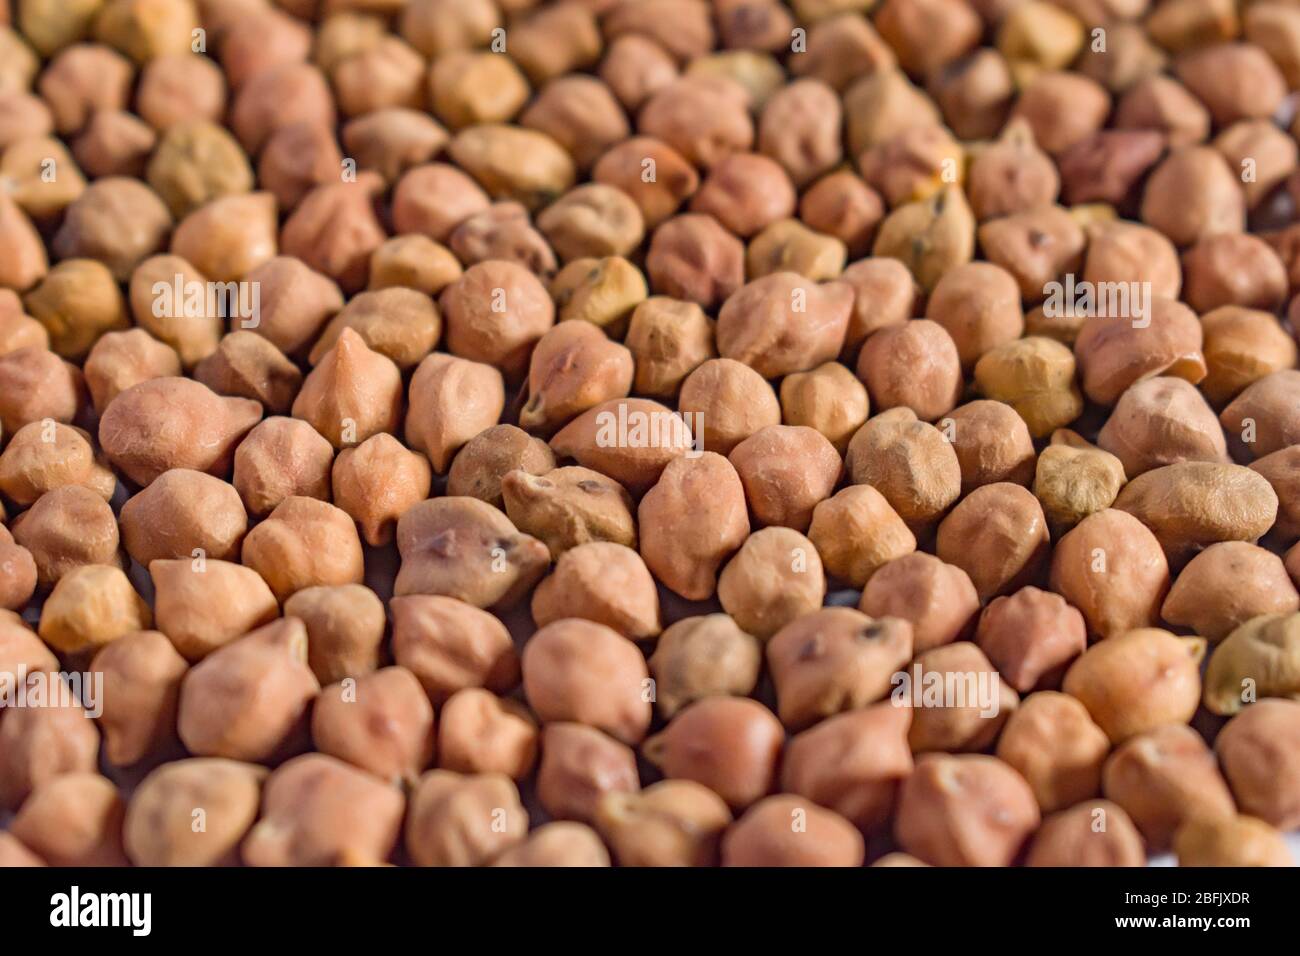 Selective focus.Chickpea with pods.The chickpea or chick pea (Cicer arietinum) is an annual legume of the family Fabaceae, subfamily Faboideae. Stock Photo